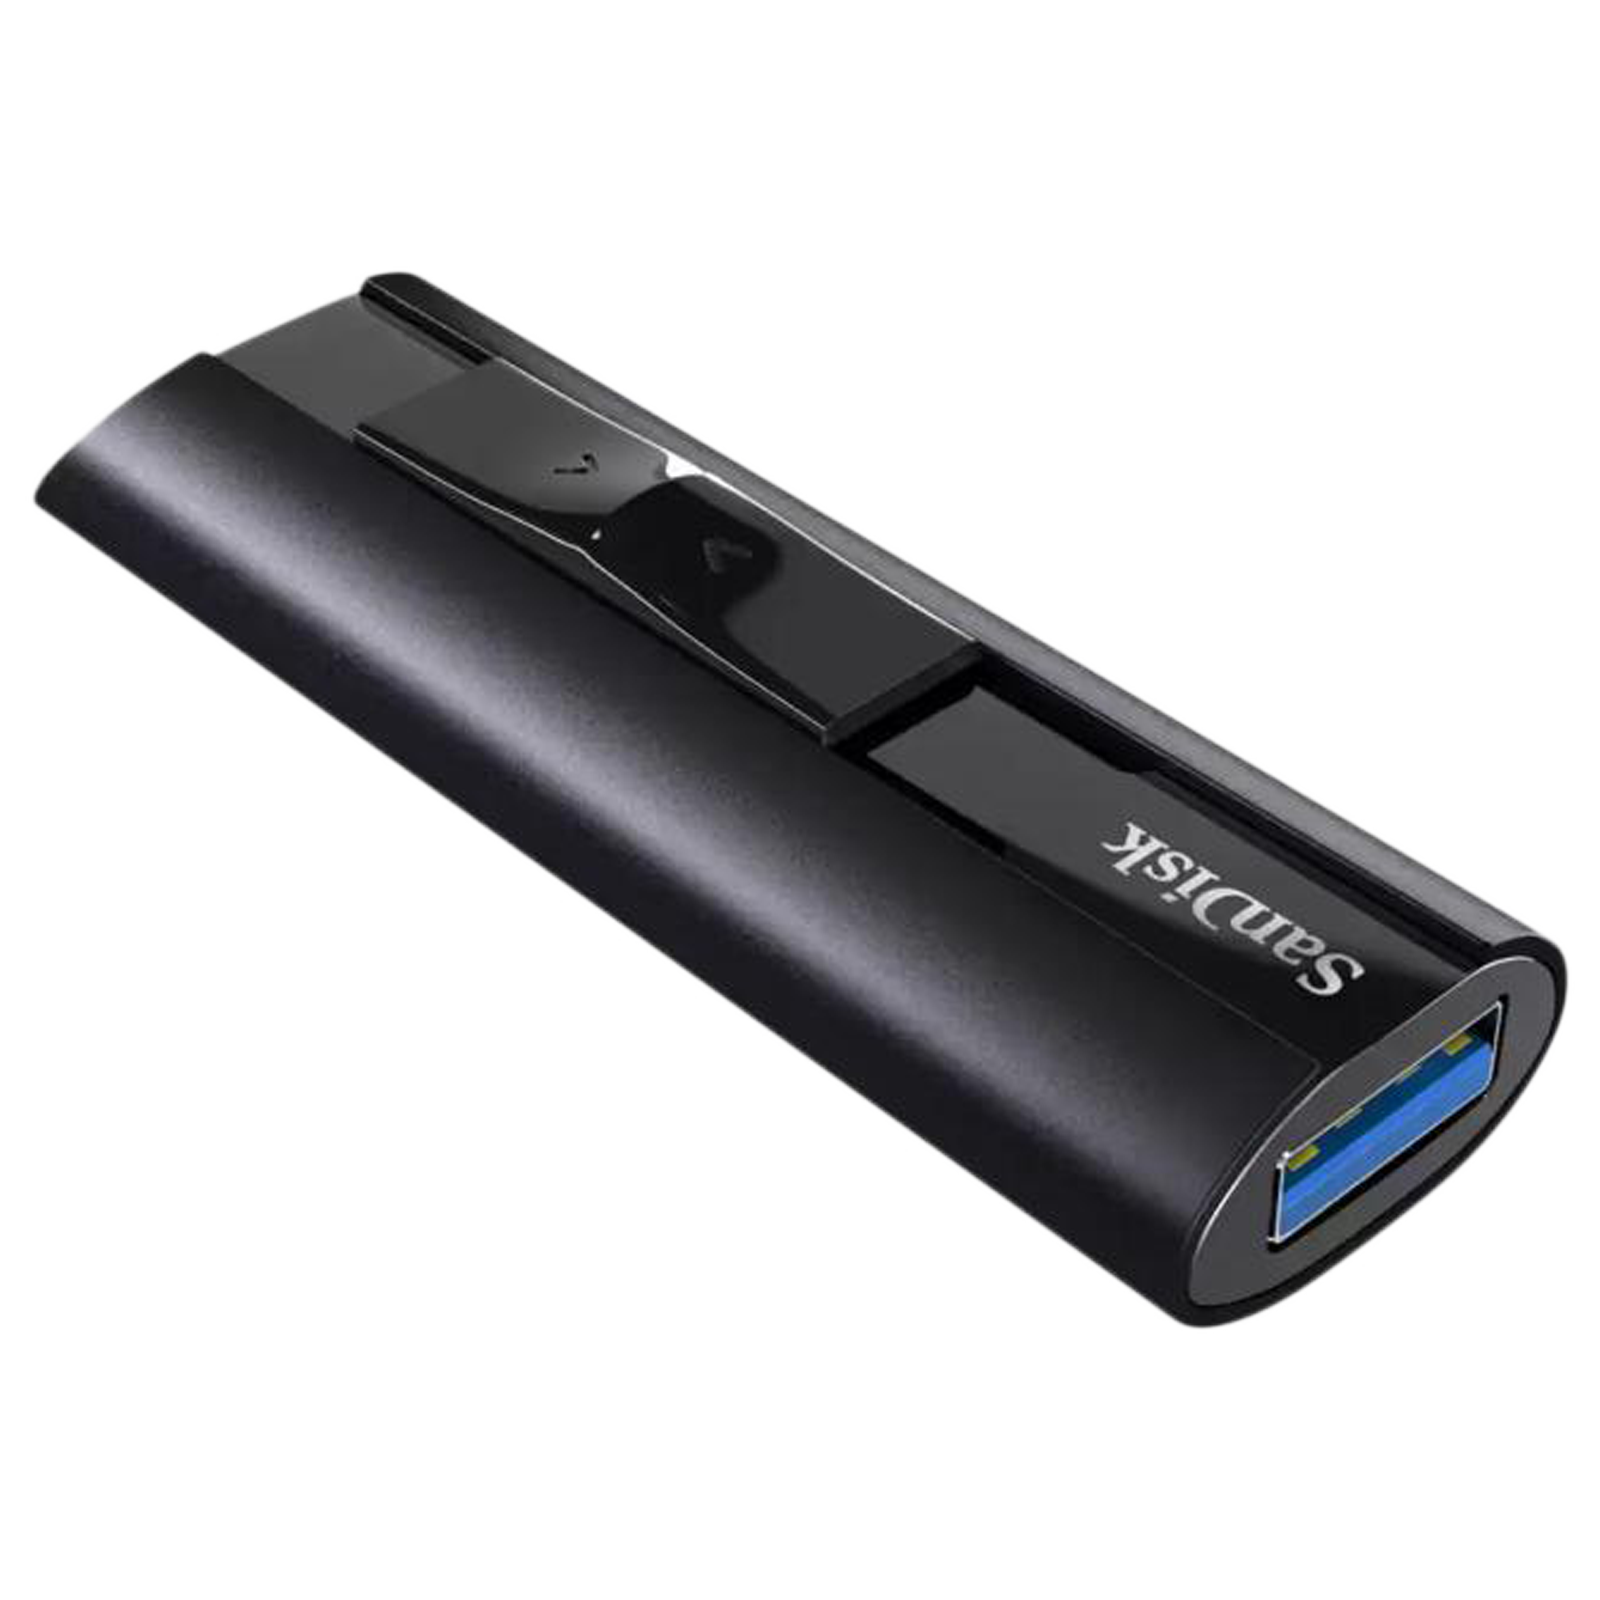 Buy Sandisk Extreme Pro 256gb Usb 32 Flash Drive 420mbs Read Speed Sdcz880 256g G46 Black 2485